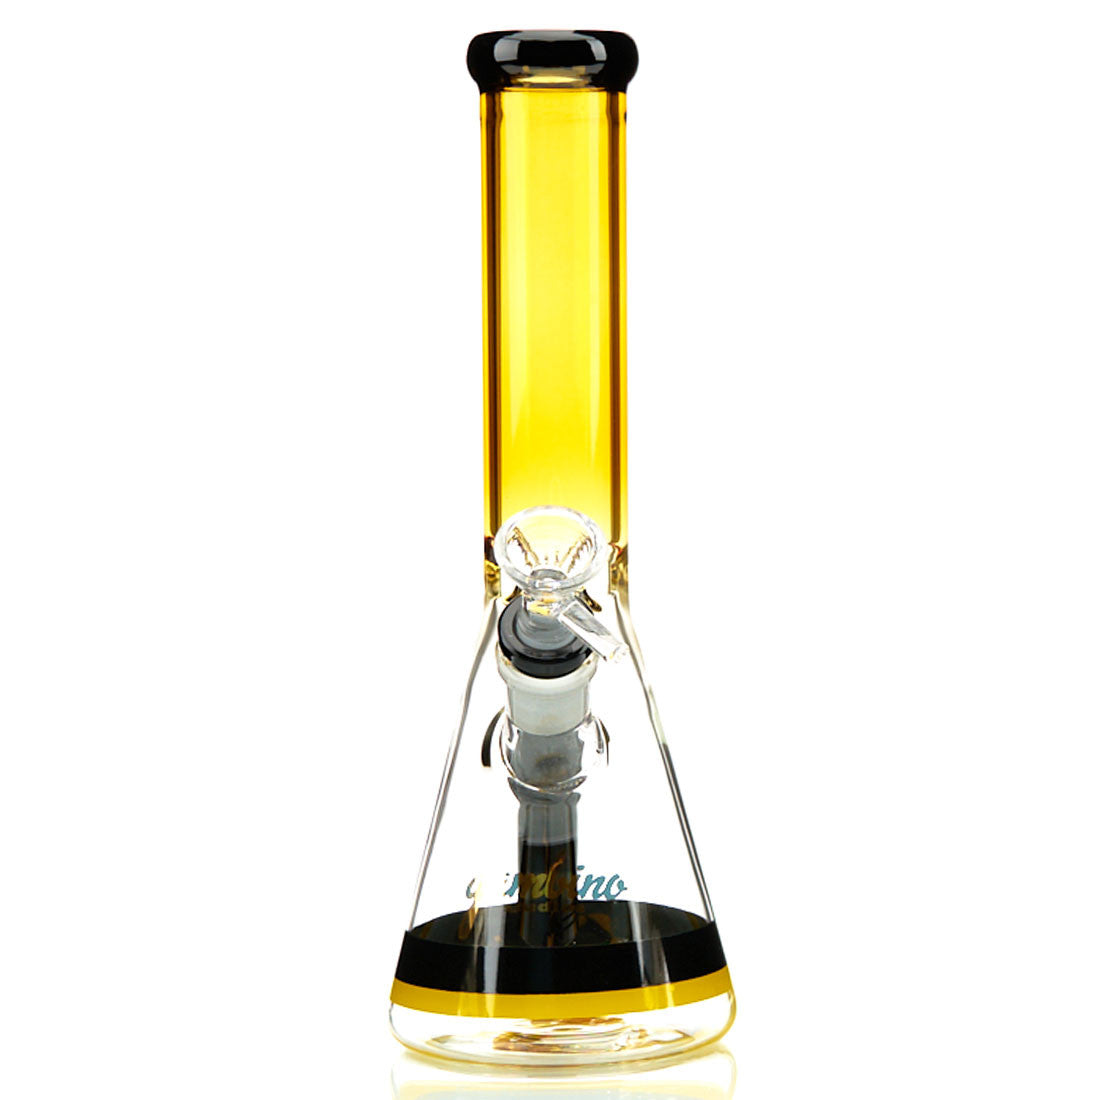 Gambino Glass Studios 10-inch beaker with gold and black accented glass 2